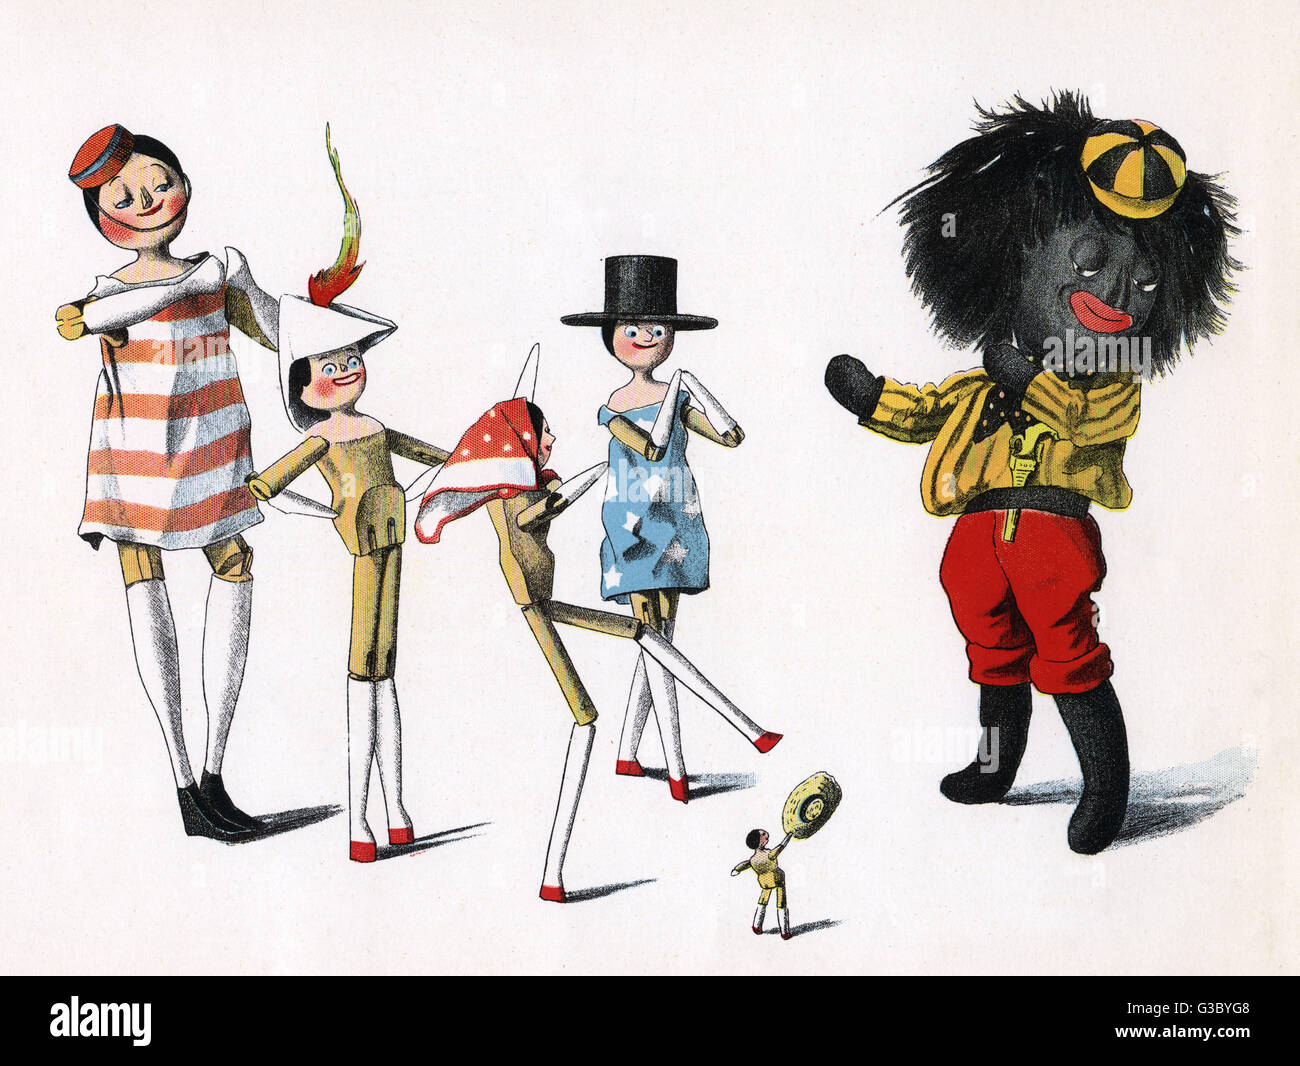 Admiration all round of the cycling outfits chosen by Golliwogg and friends. The book charts Golliwogg's adventures with his dutch peg doll friends Peggy, Weg, Meg, Sarah Jane and the dinky little Midget. This is the 2nd title in a 13-book series of Golli Stock Photo